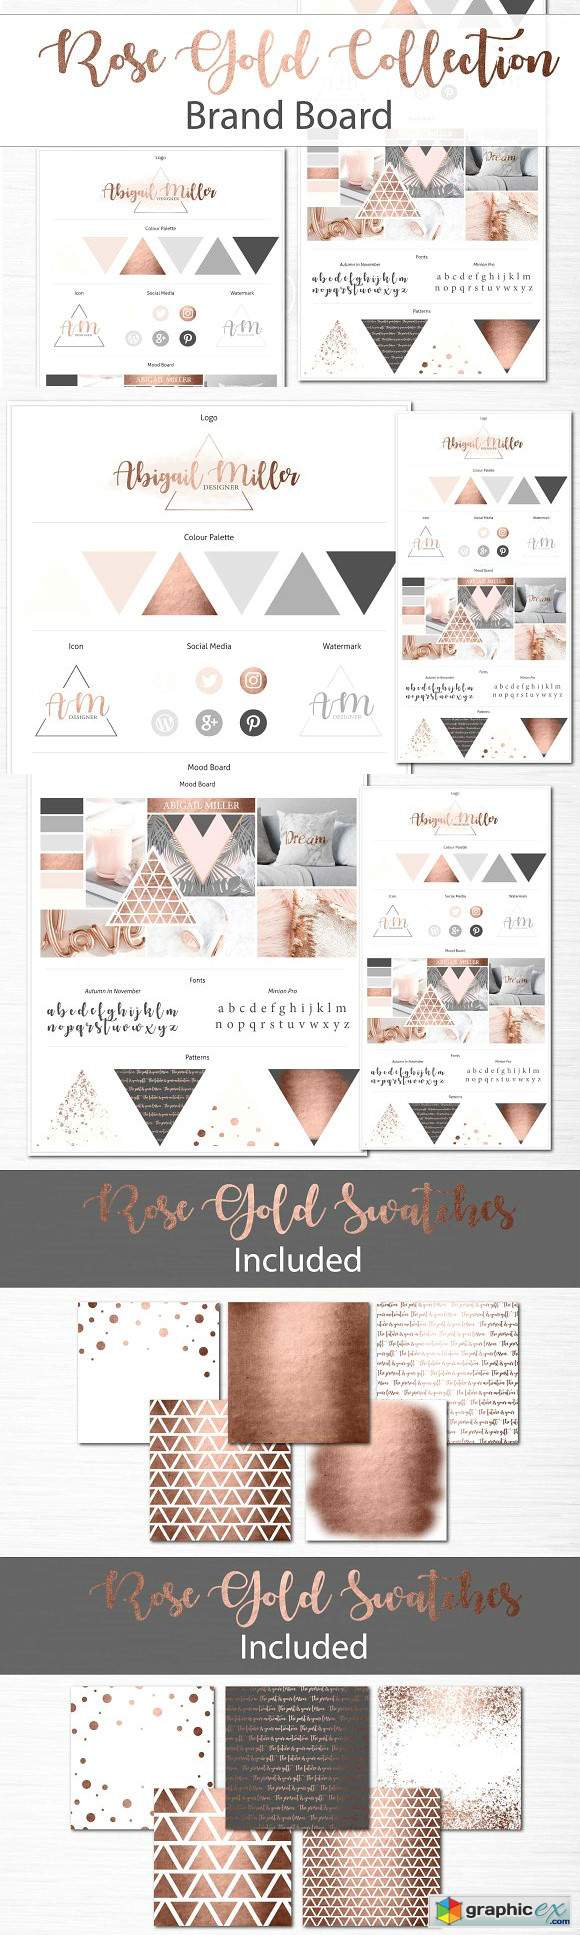 Brand Board - Rose Gold Collection